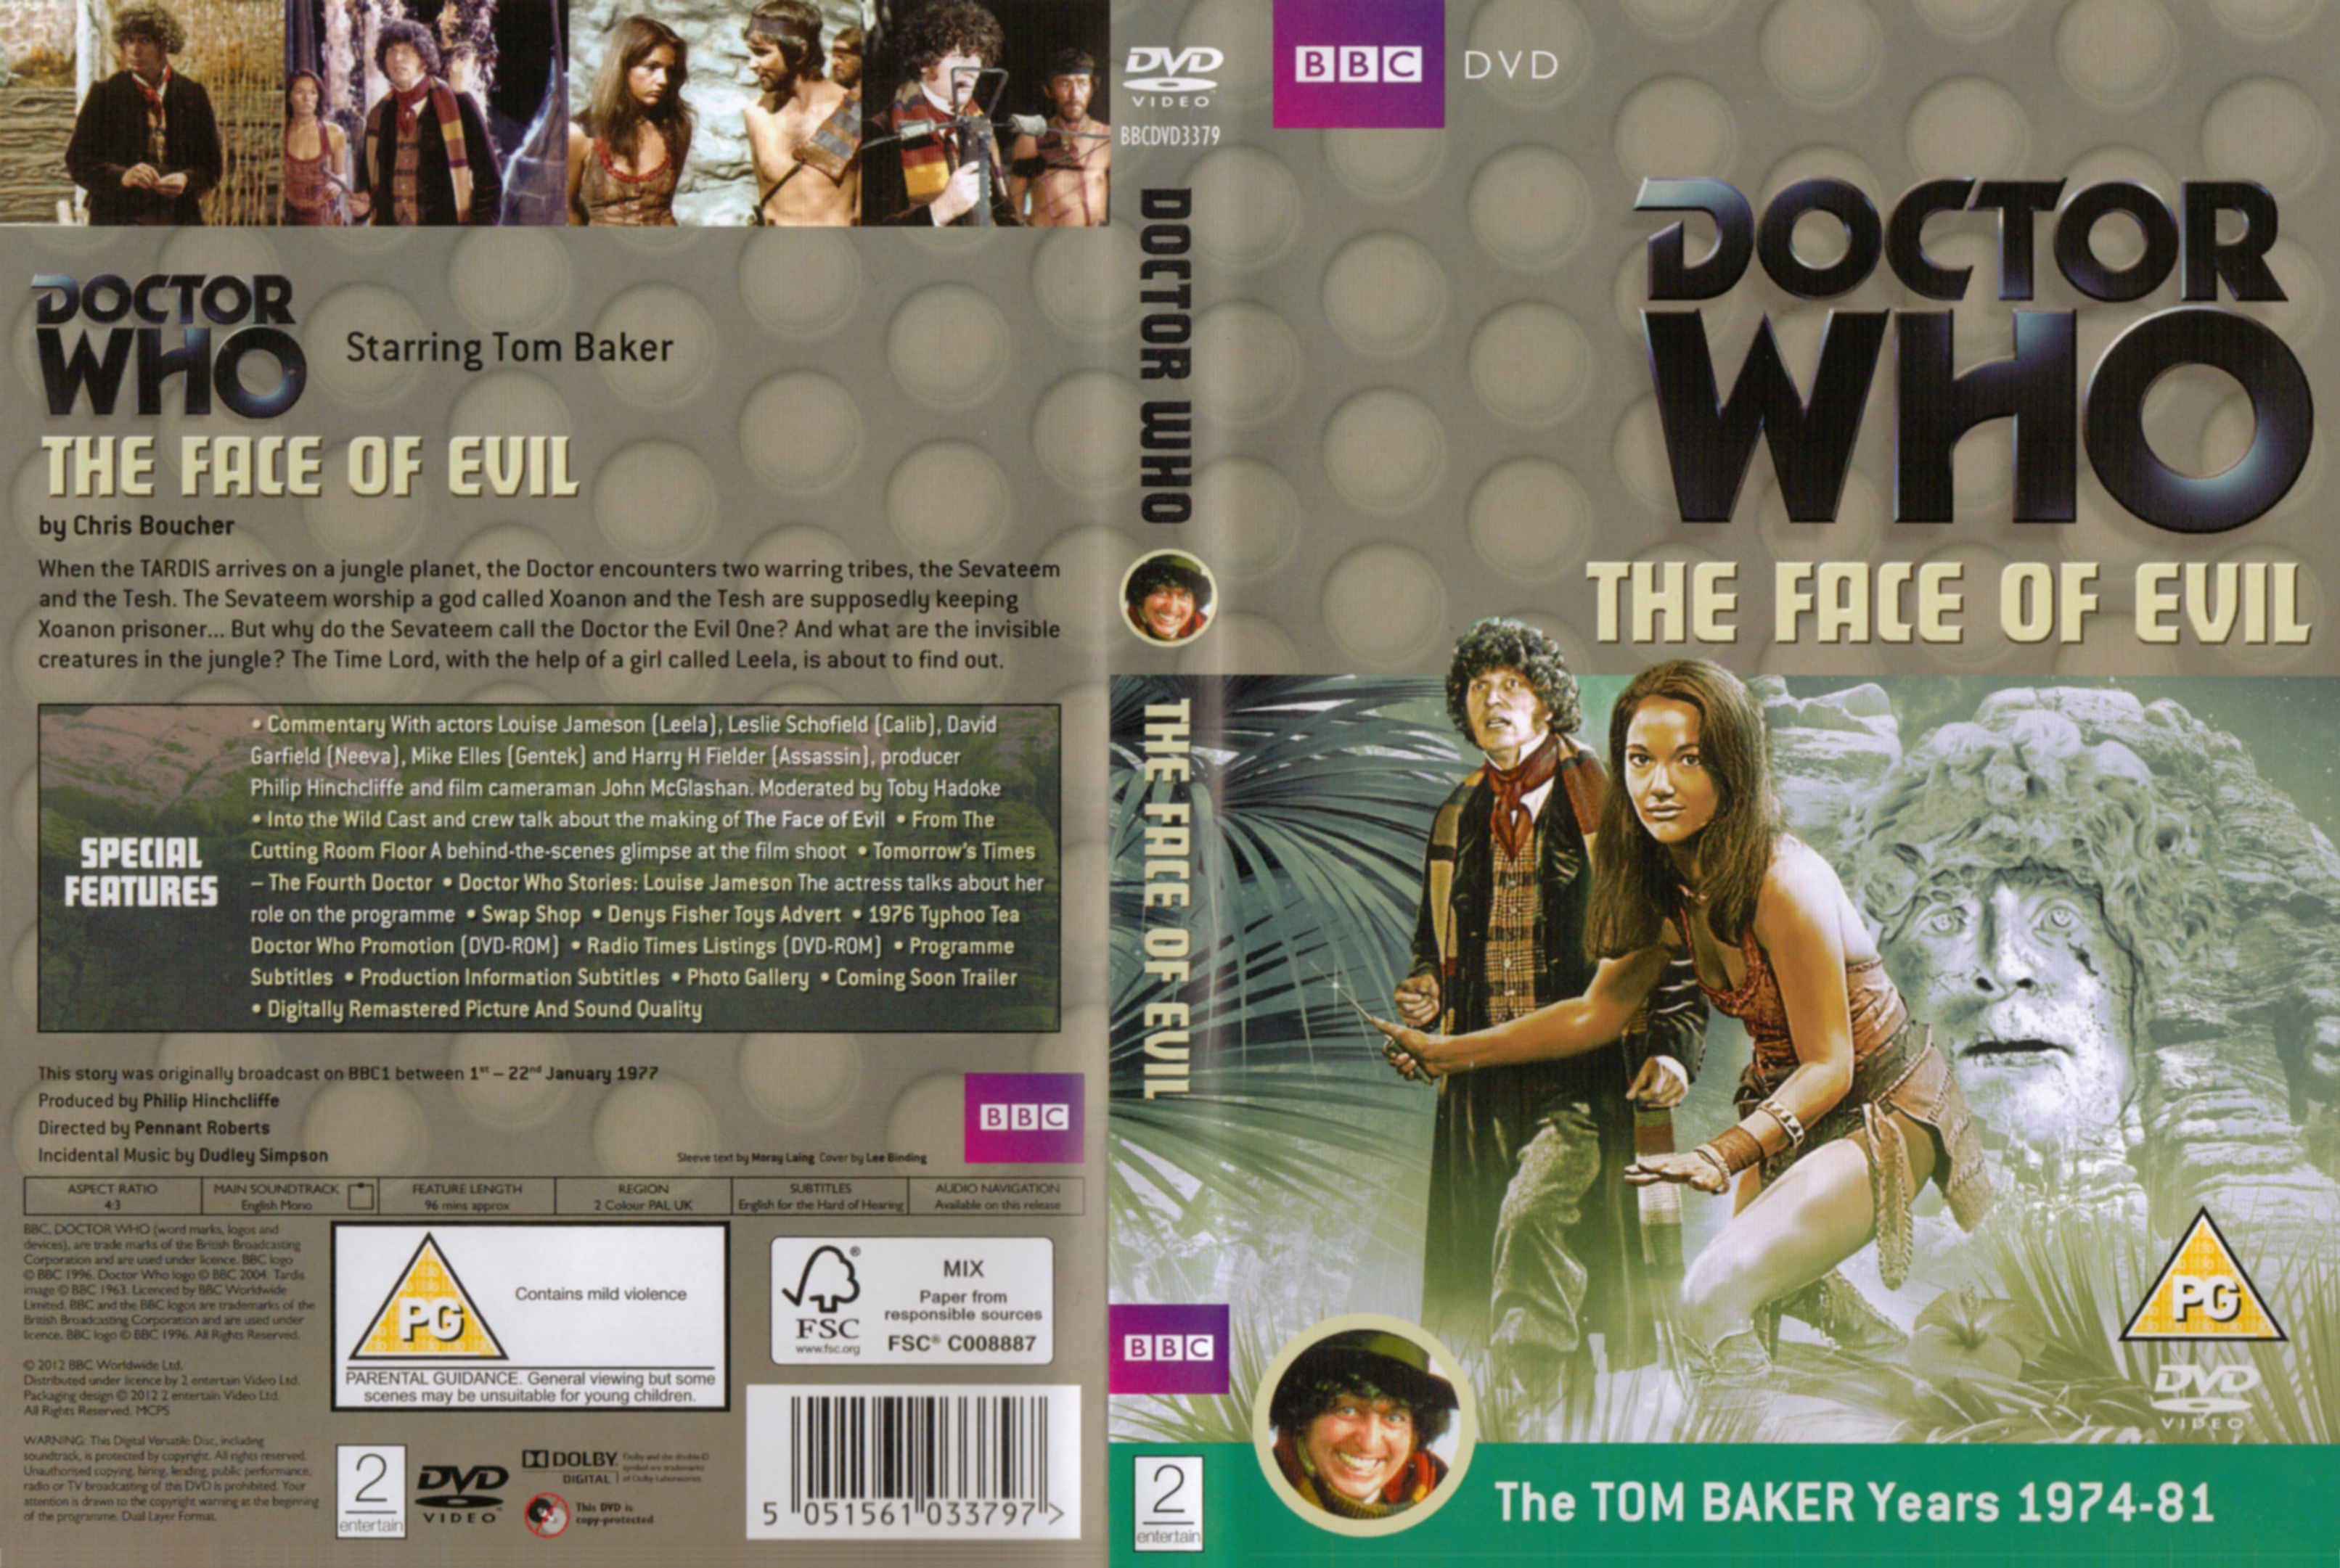 The Face of Evil DVD